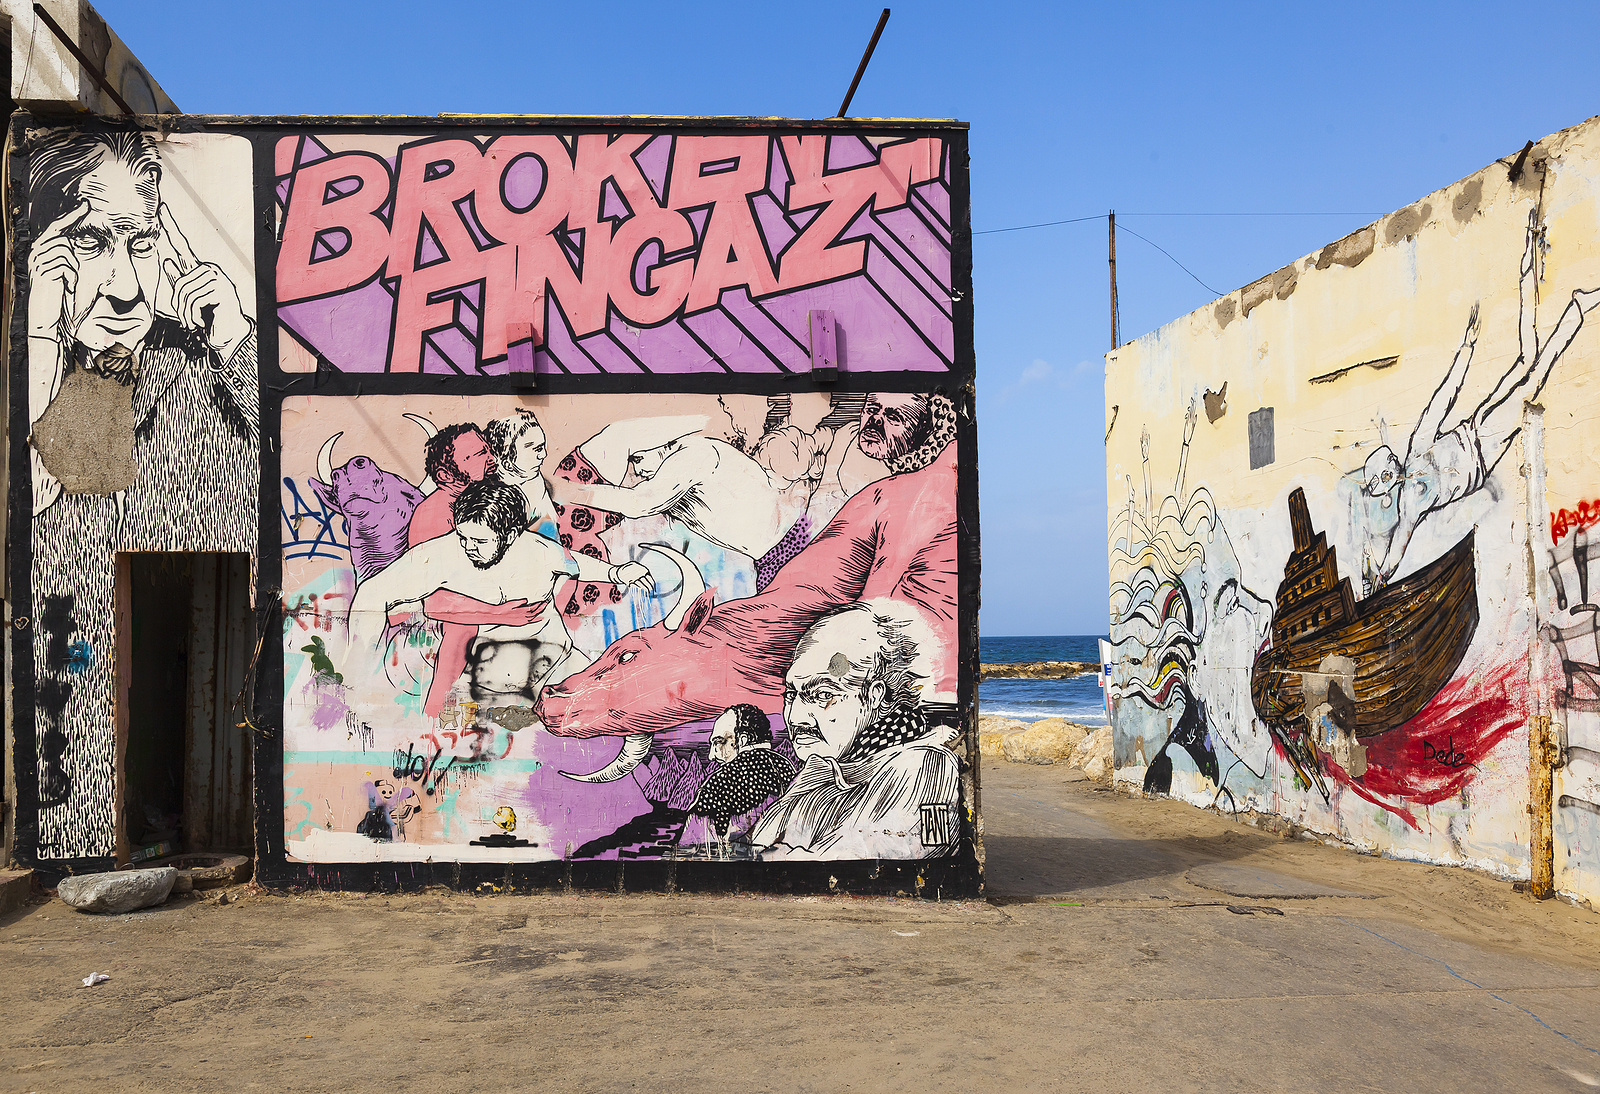 Street and Graffiti Art in Israel – Artists, Meanings, Fame in the World